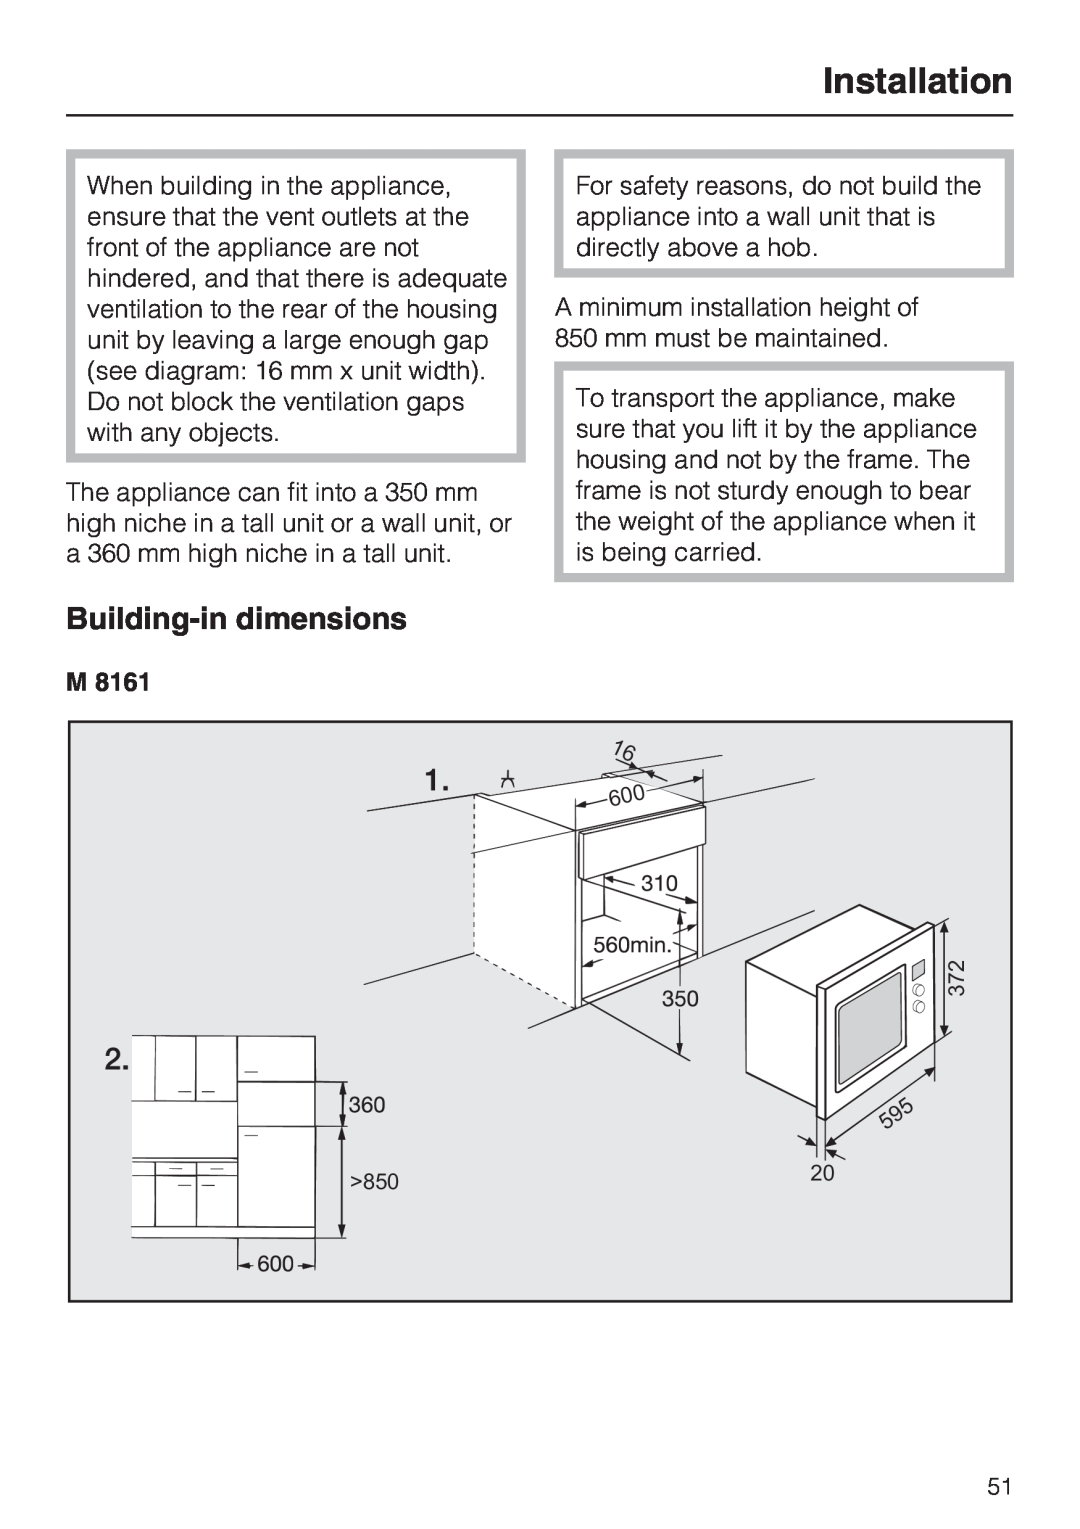 Miele M 8161-1, M 8151-1 manual Installation, Building-in dimensions 